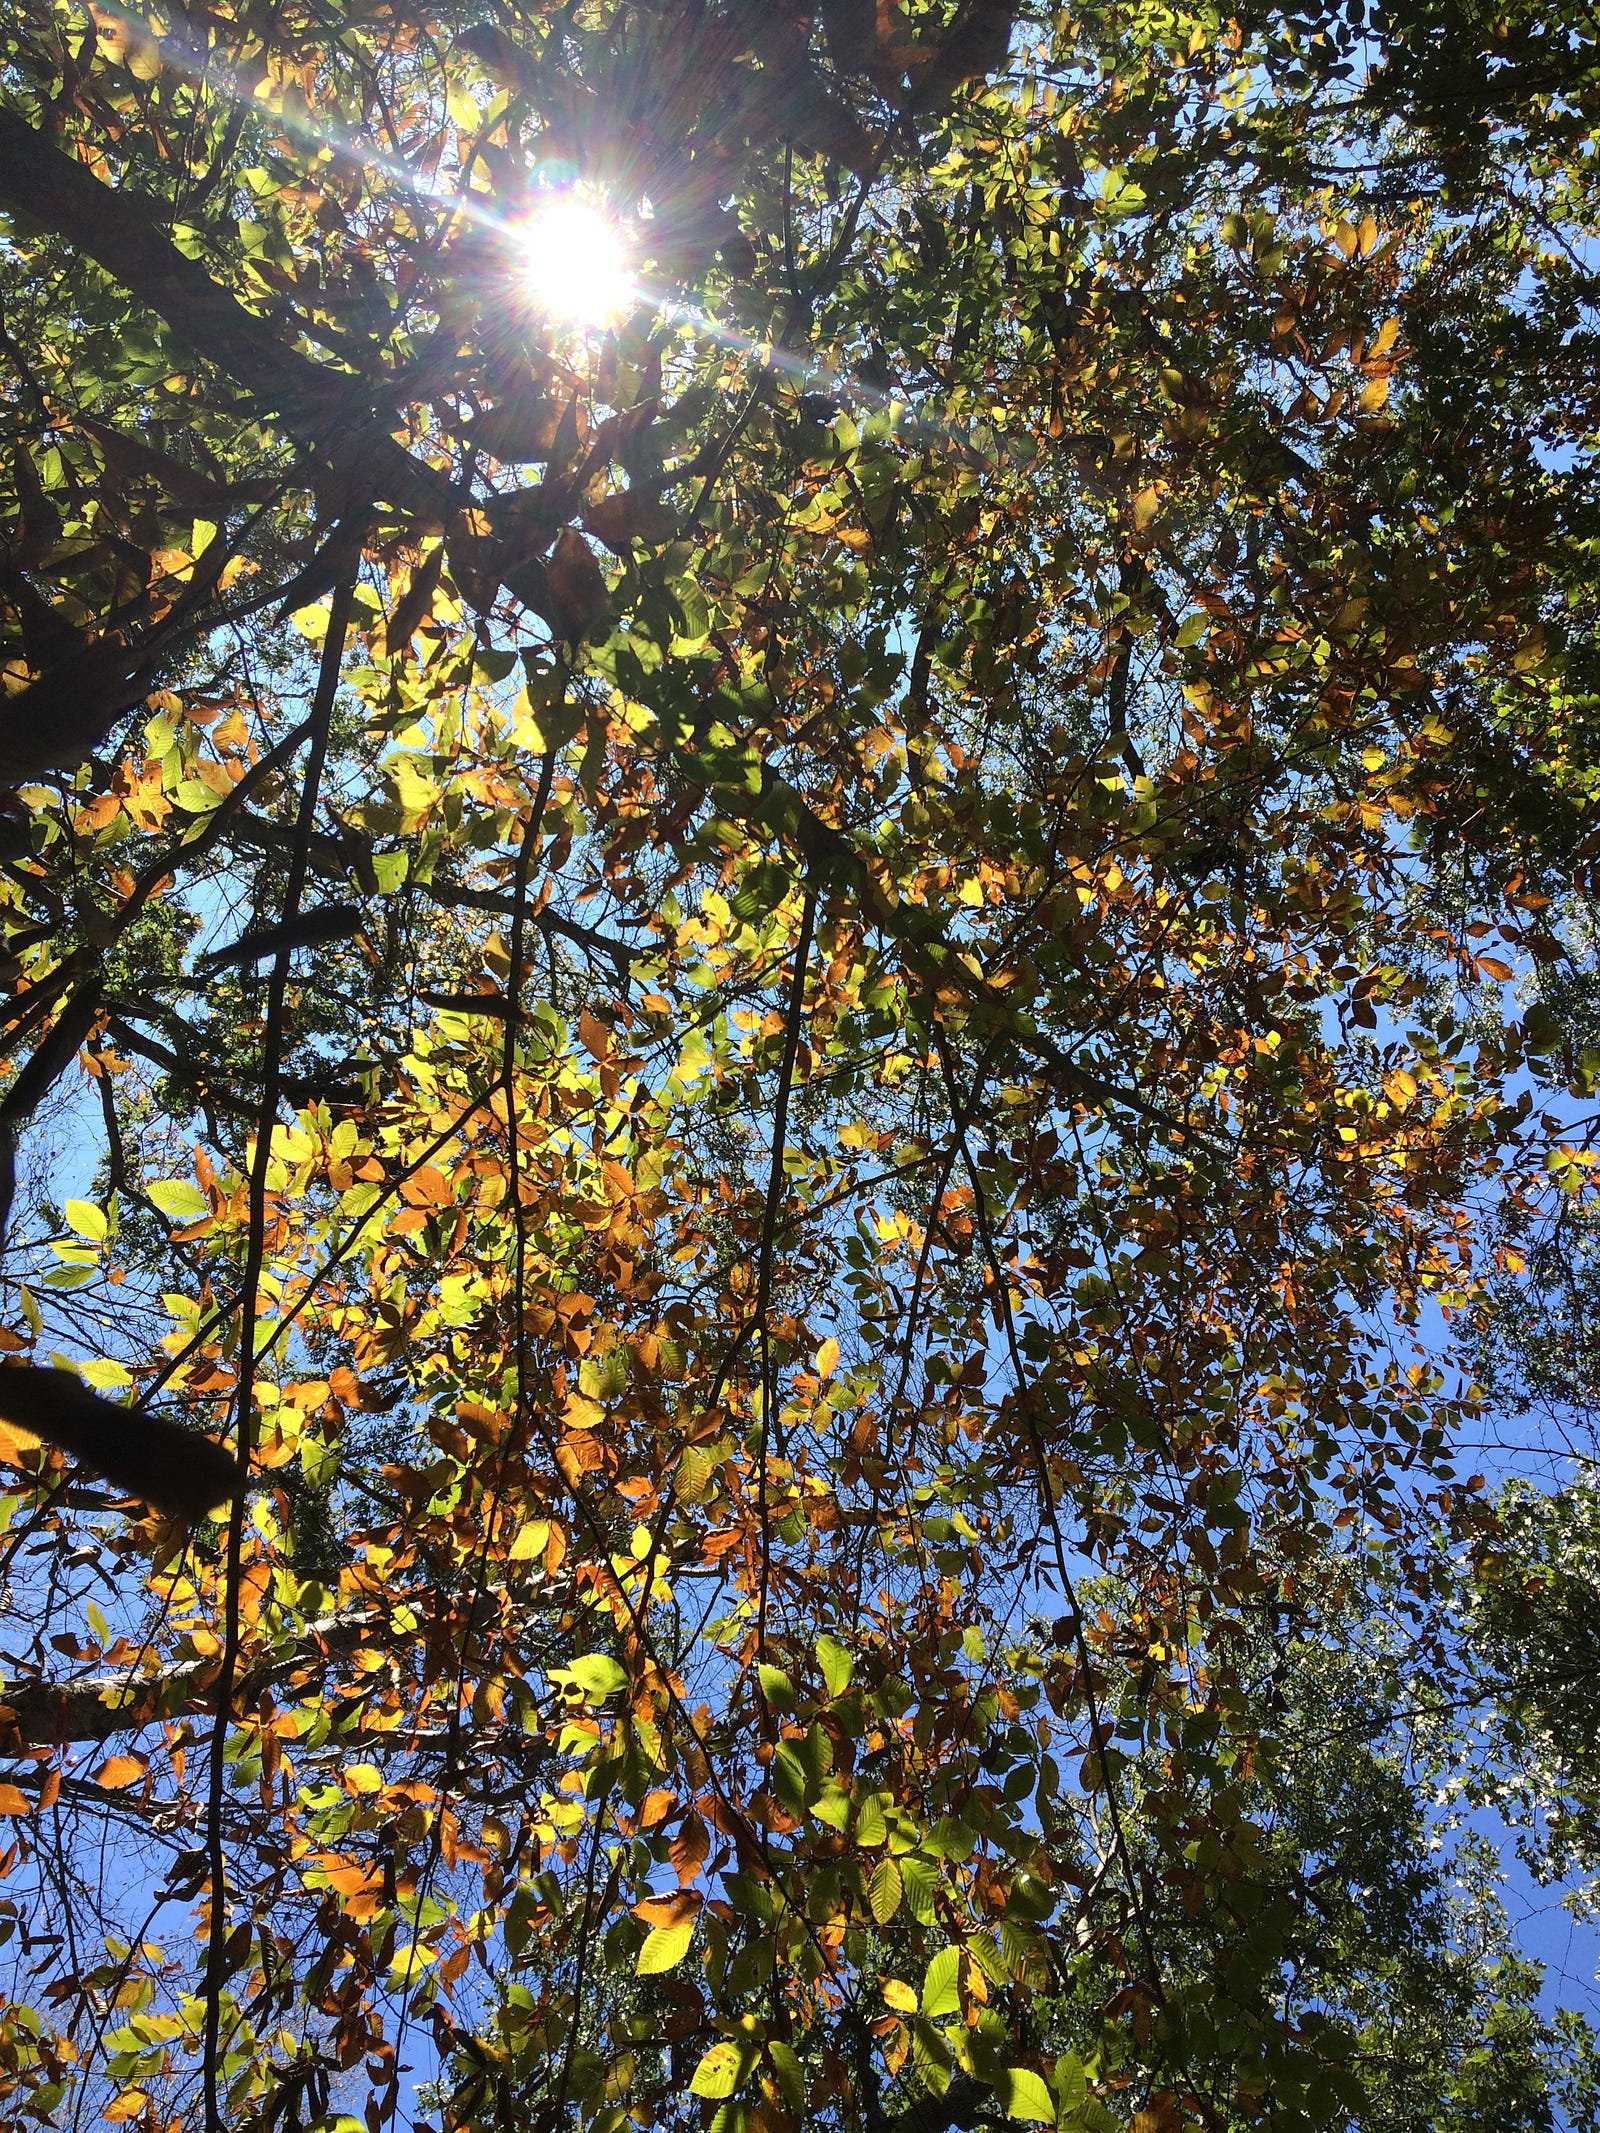 Photo over an overhead view of yellow leafed beech trees in October, the sun shining brightly through the leaves.